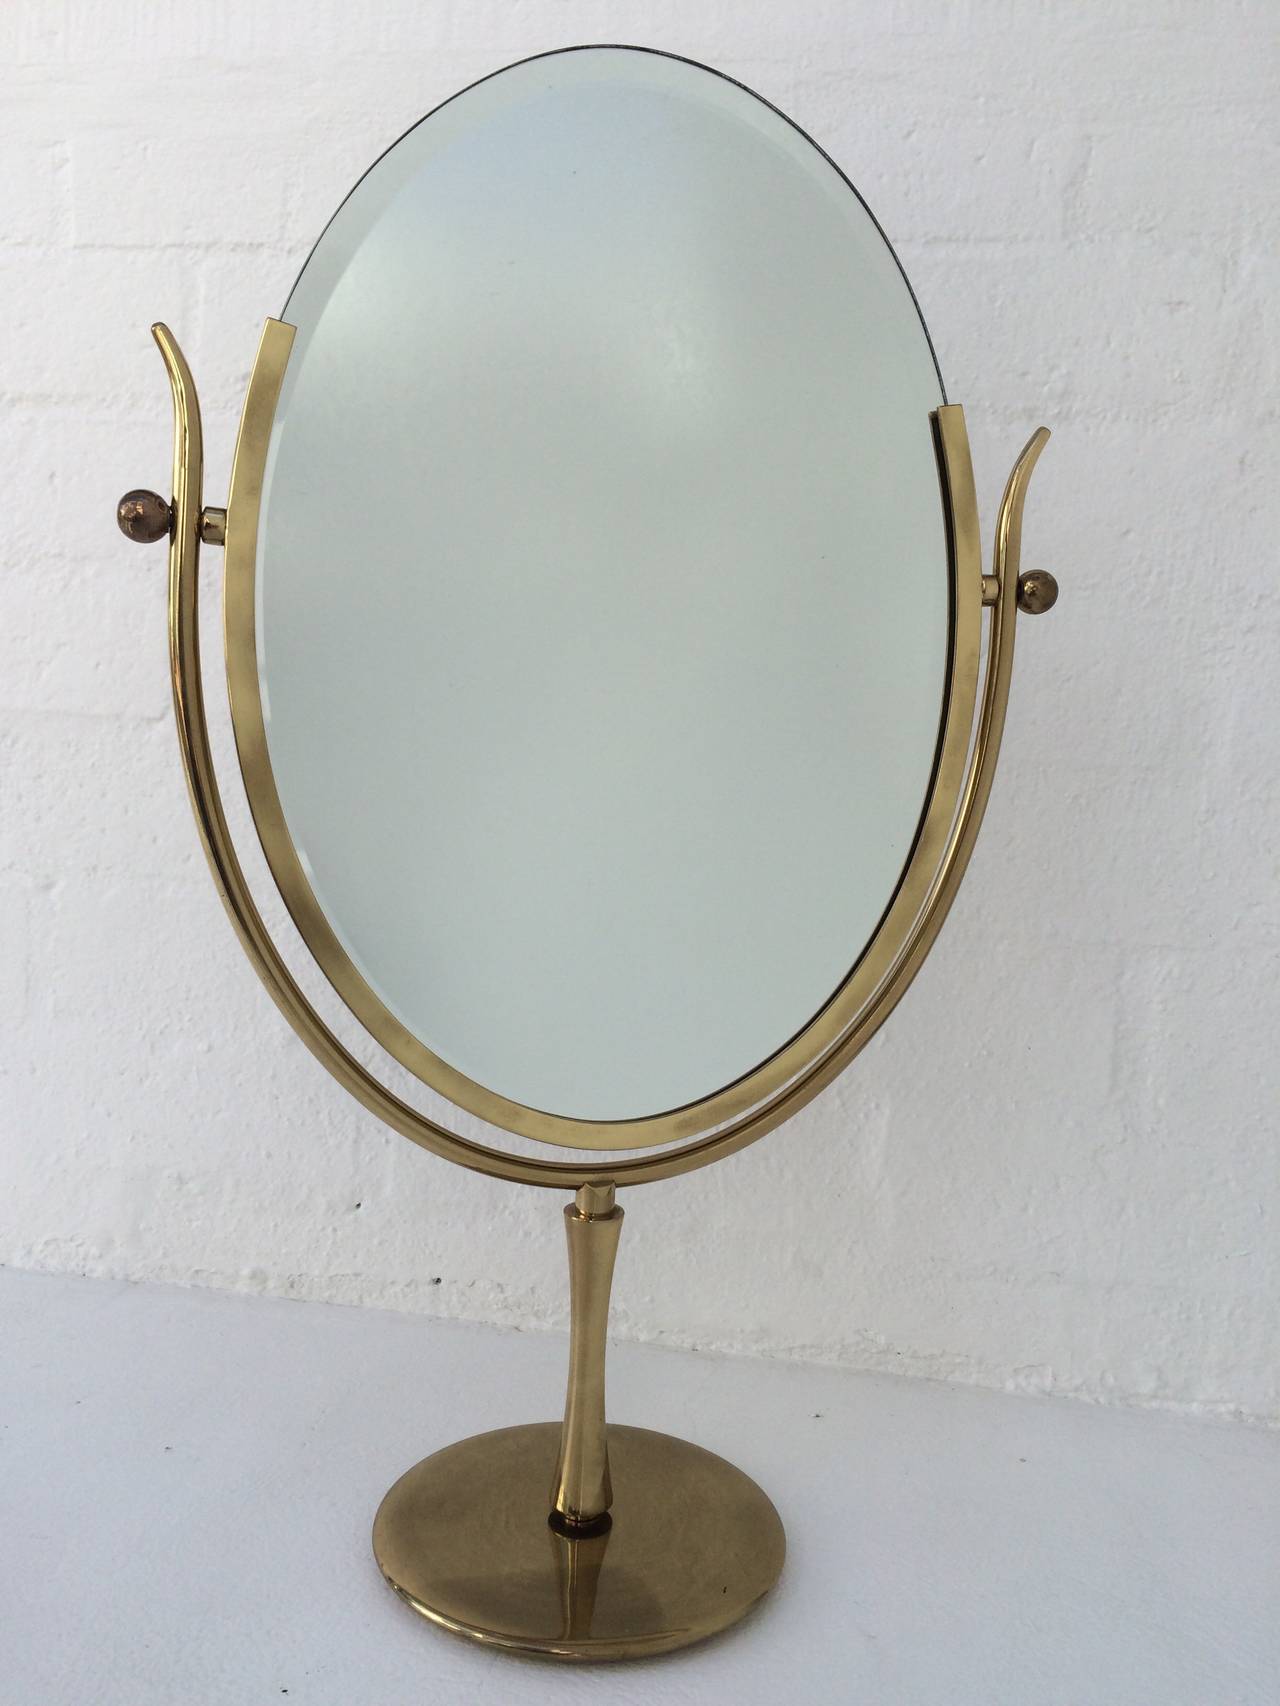 This wonderful table mirror is designed by Charles Hollis Jones. 
The beveled mirror is supported by a heavy brass stand and has brown leather on the back. 
circa 1970s.